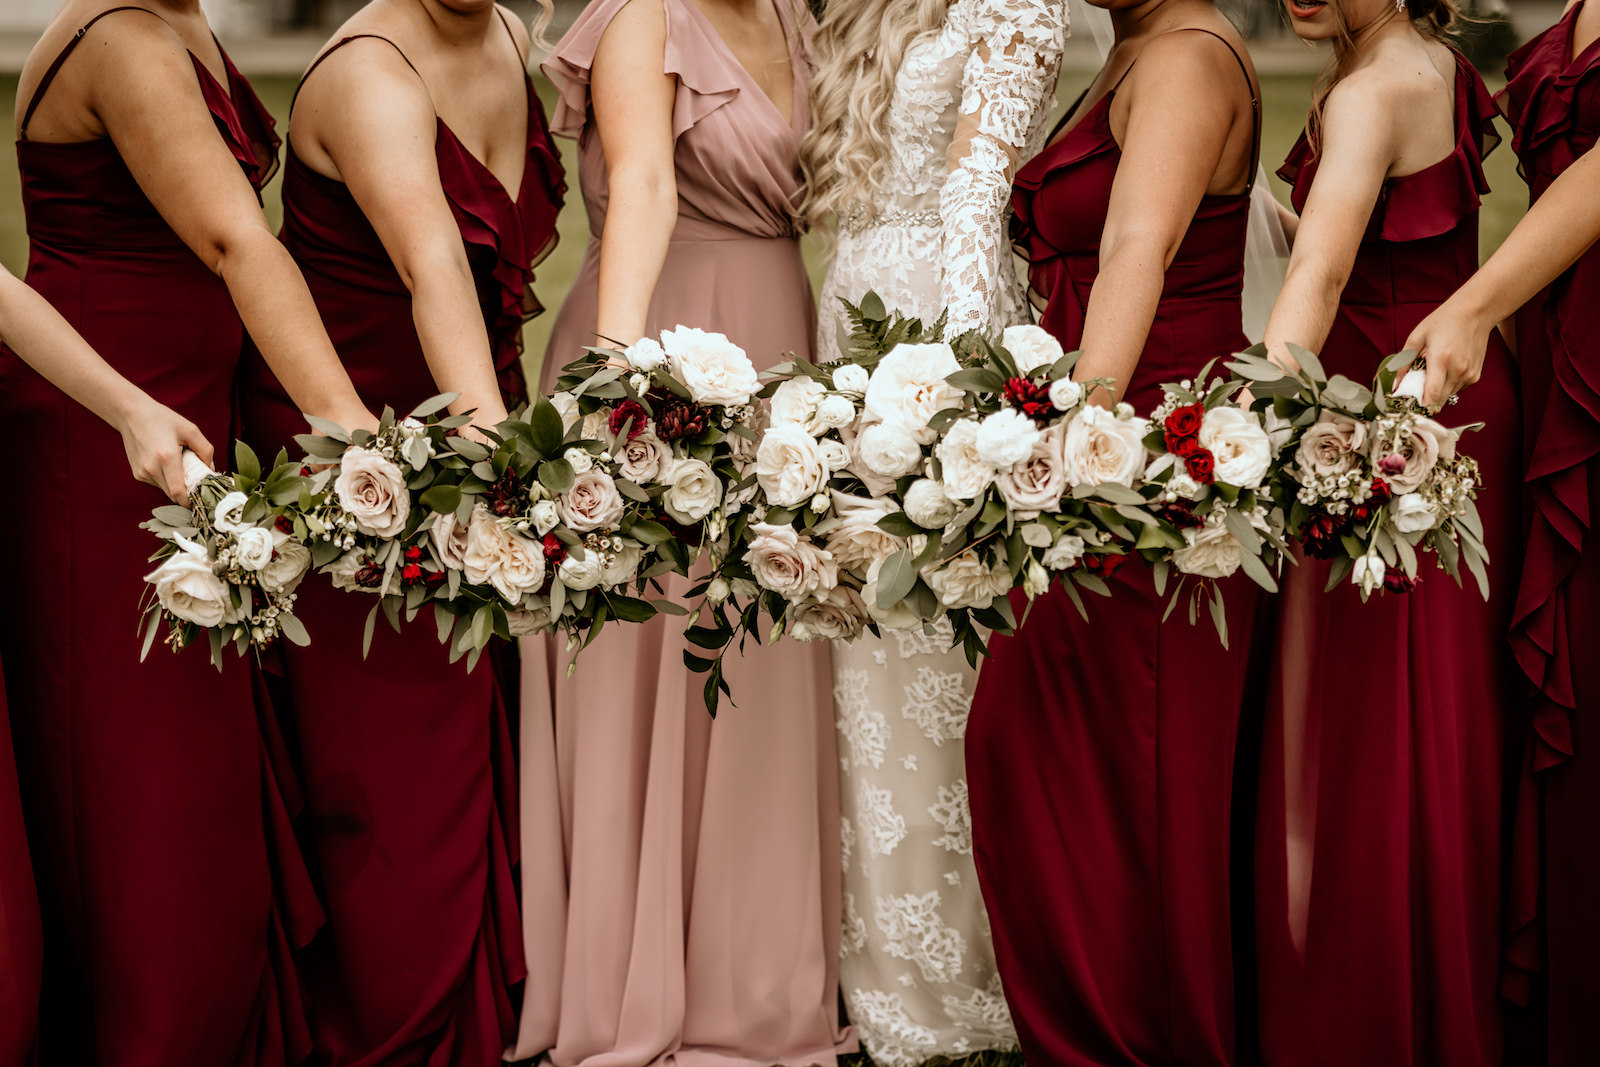 Burgundy and Blush Mix and Match Floor Length Bridesmaids Dresses with Blush White and Burgundy Rose Bouquets with Greenery